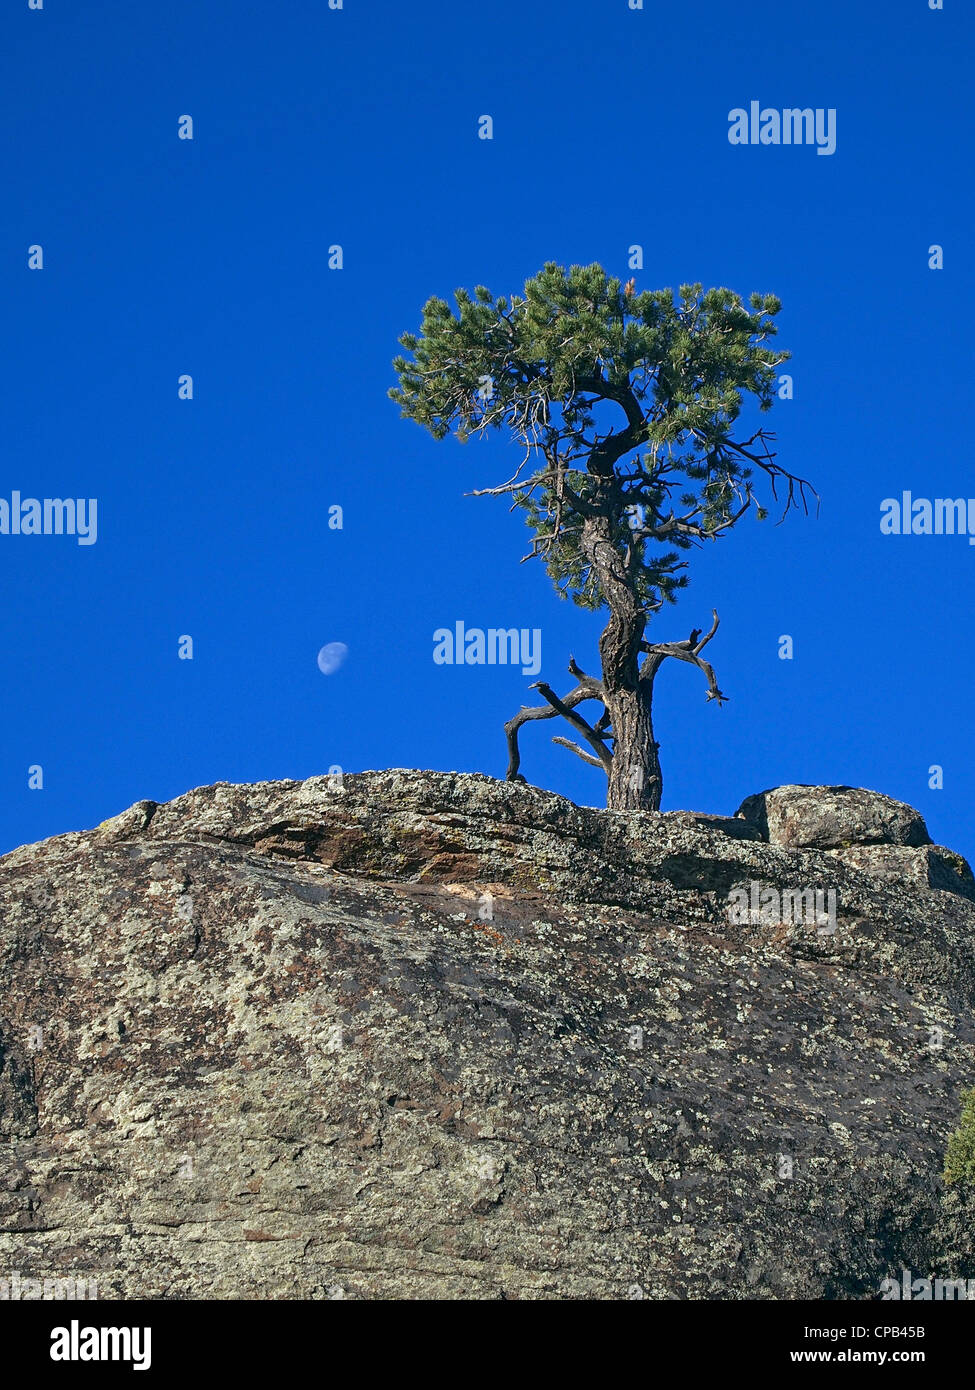 The moon sets behind a pinyon pine tree early on a desert morning. Stock Photo